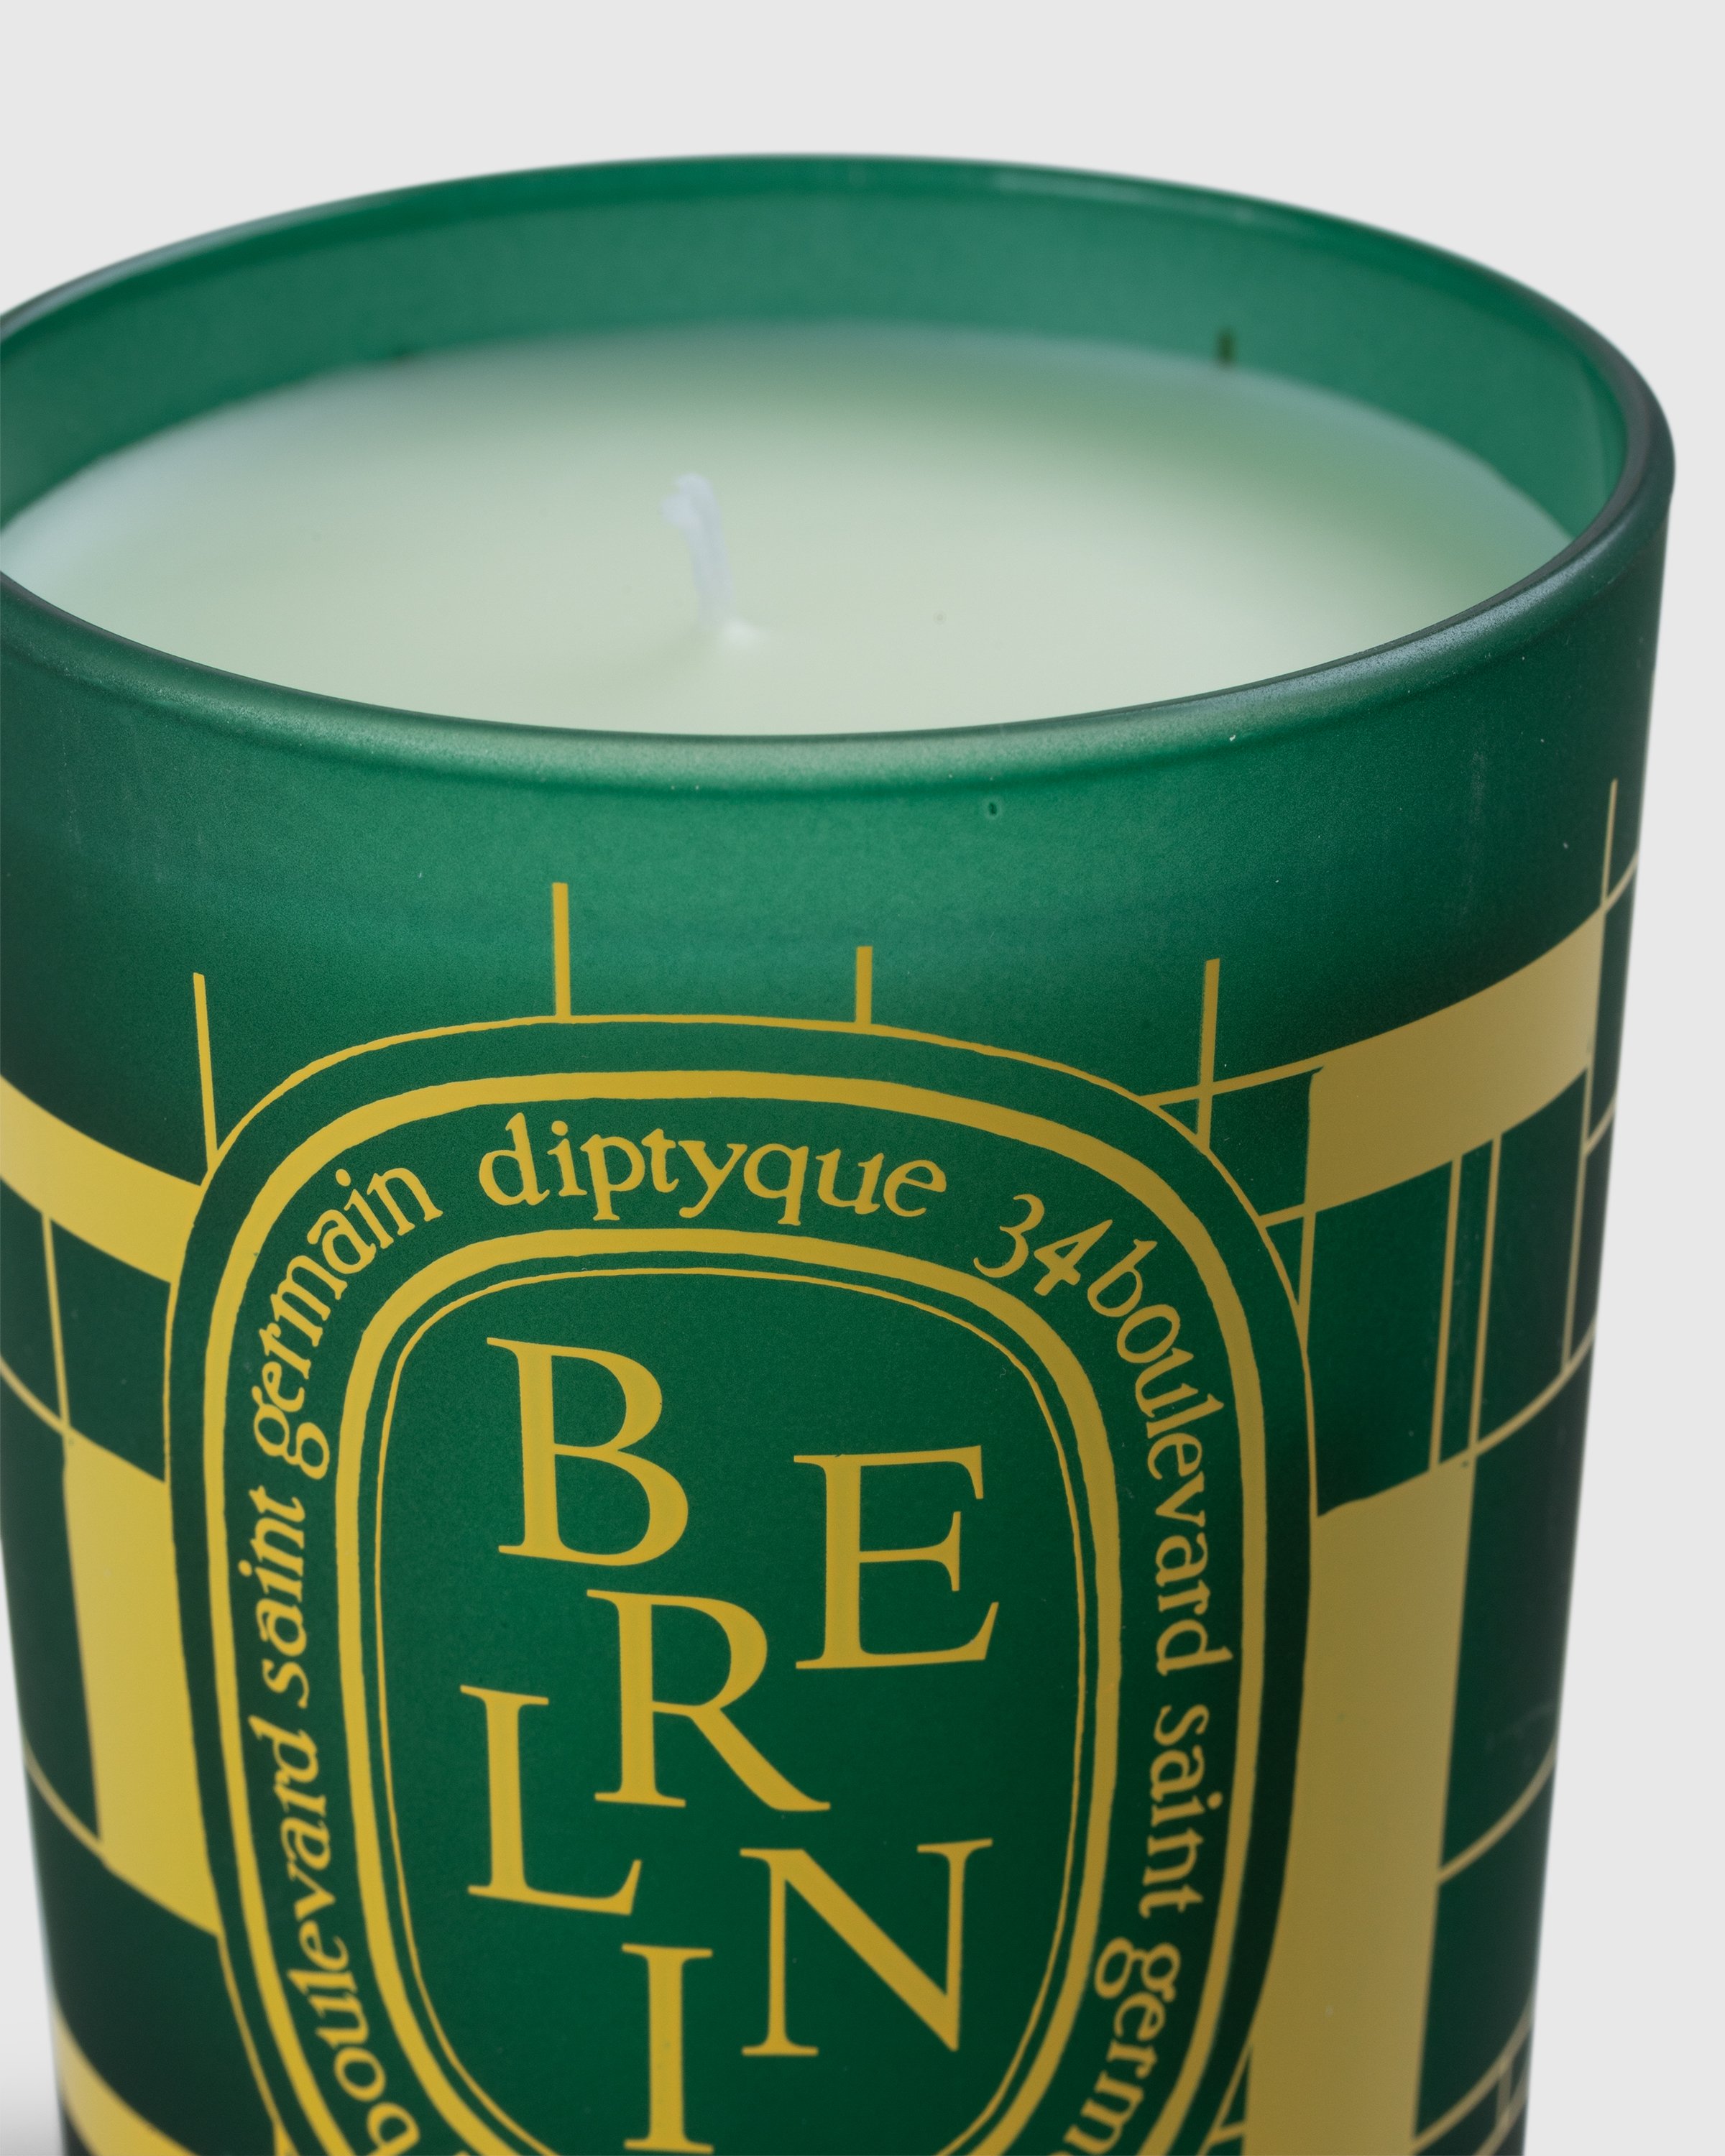 Diptyque - Berlin City Candle - Lifestyle - Green - Image 2